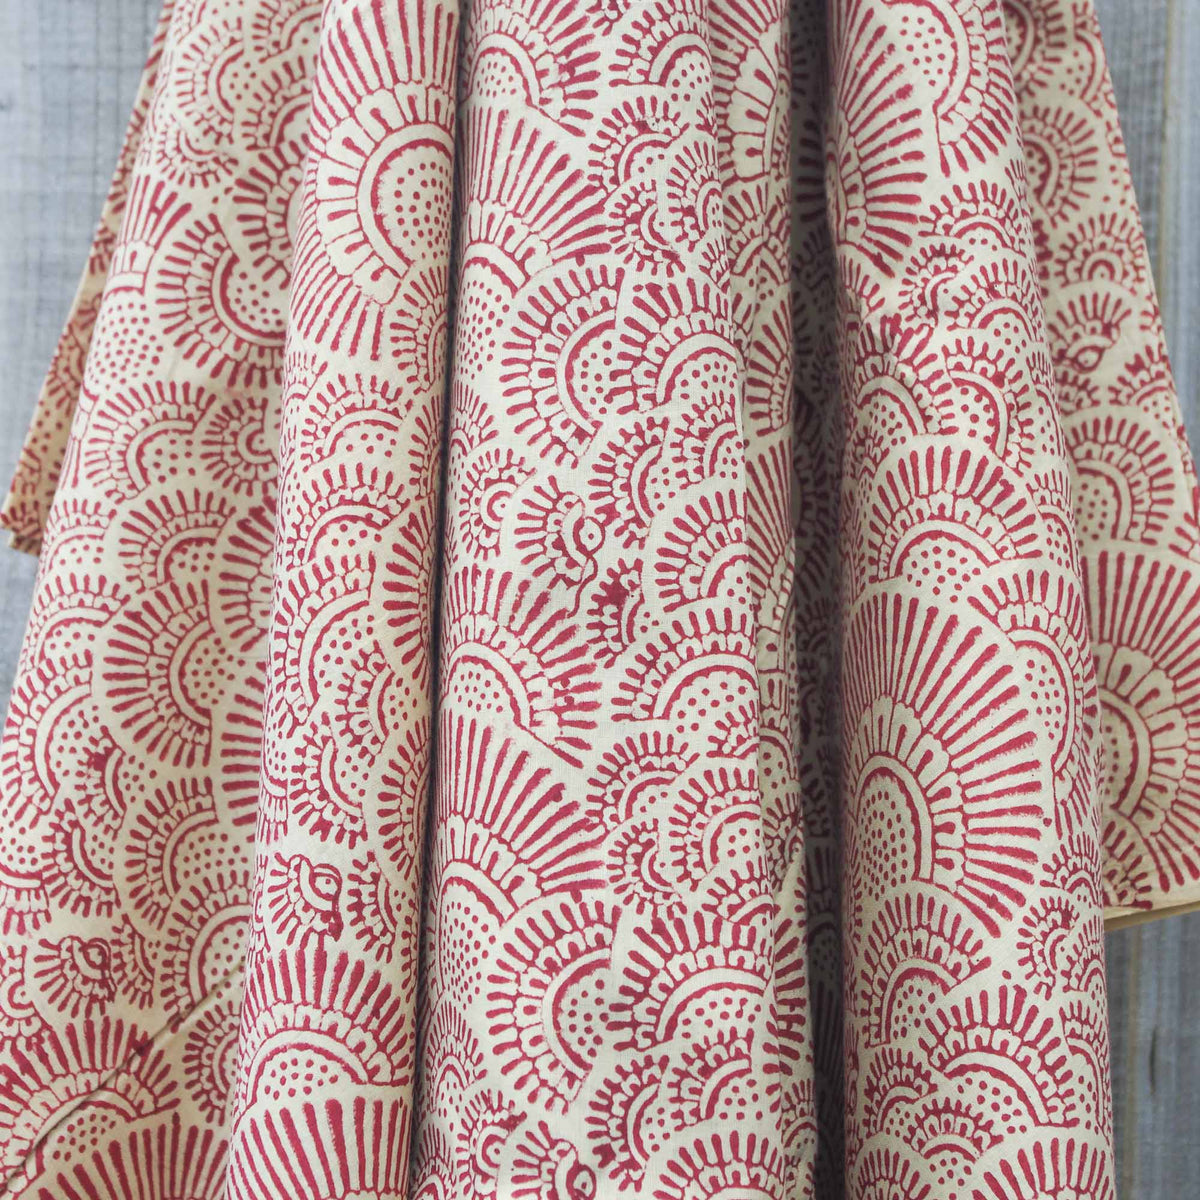 You can use this block printed cotton fabric to make Drapery